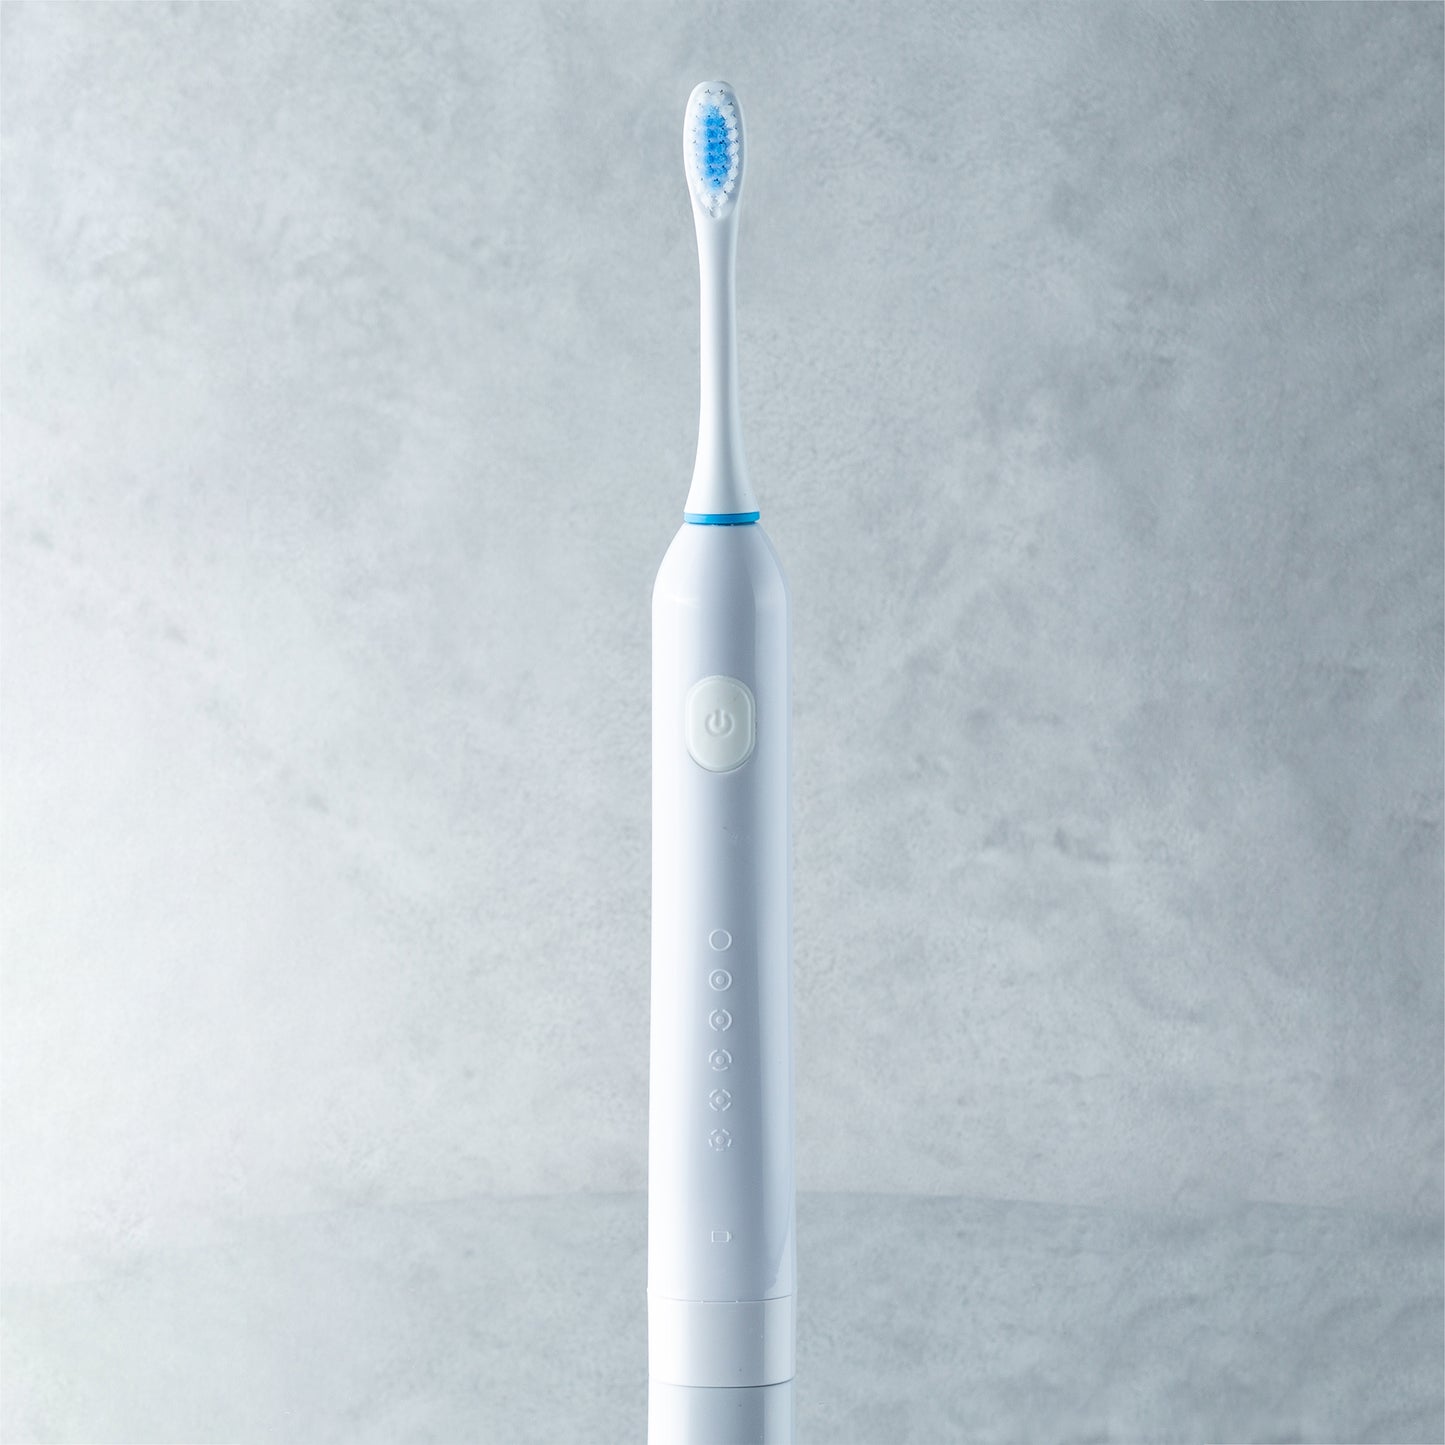 GALLEIDO ELECTRIC TOOTHBRUSH (No Subscription)